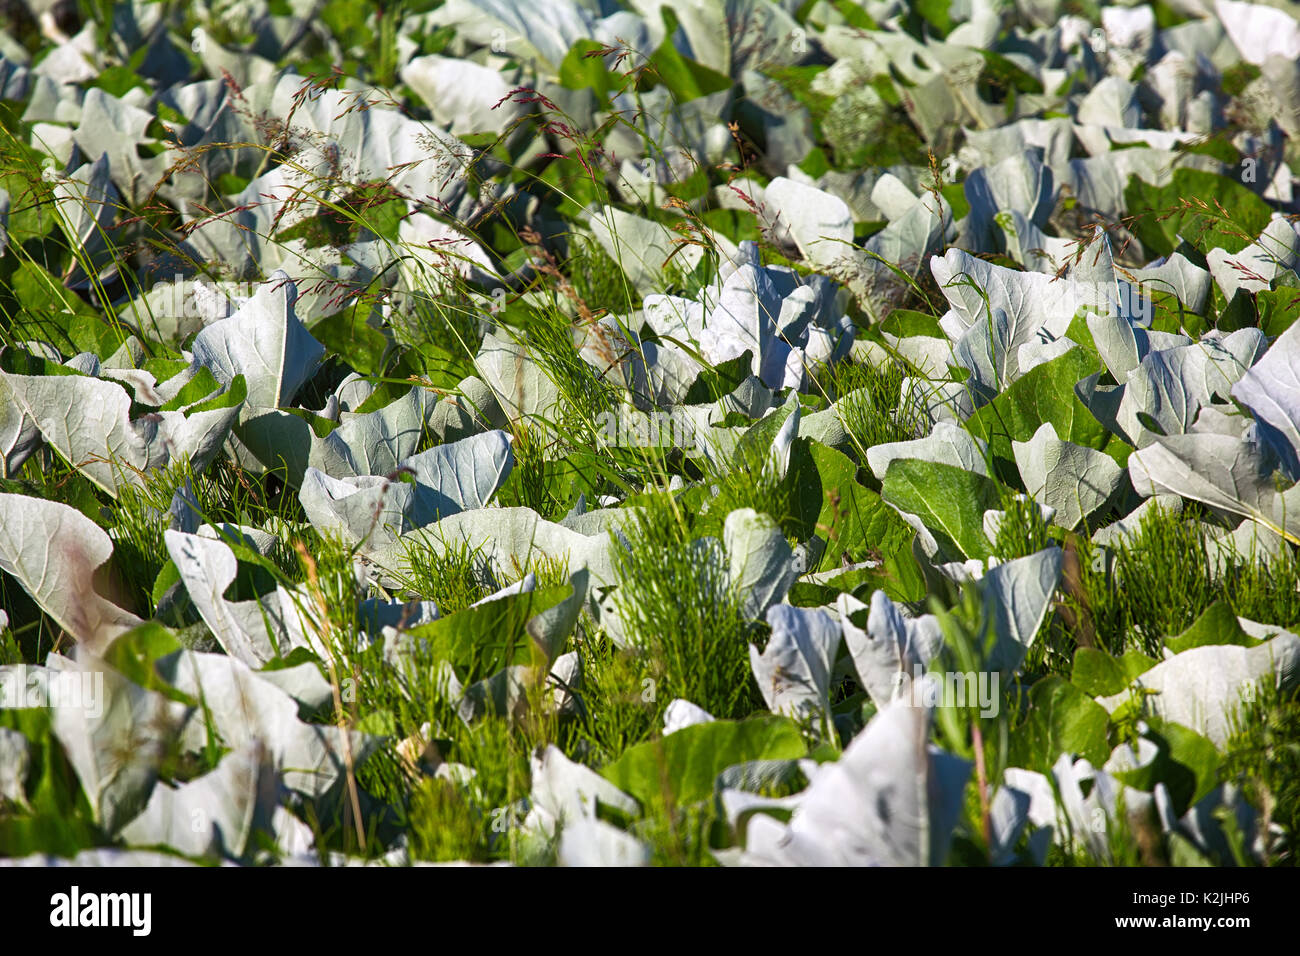 Mosaic white leaf os Coltsfoot and Horsetail in grid of cereals, swaying in wind. Garden design Stock Photo